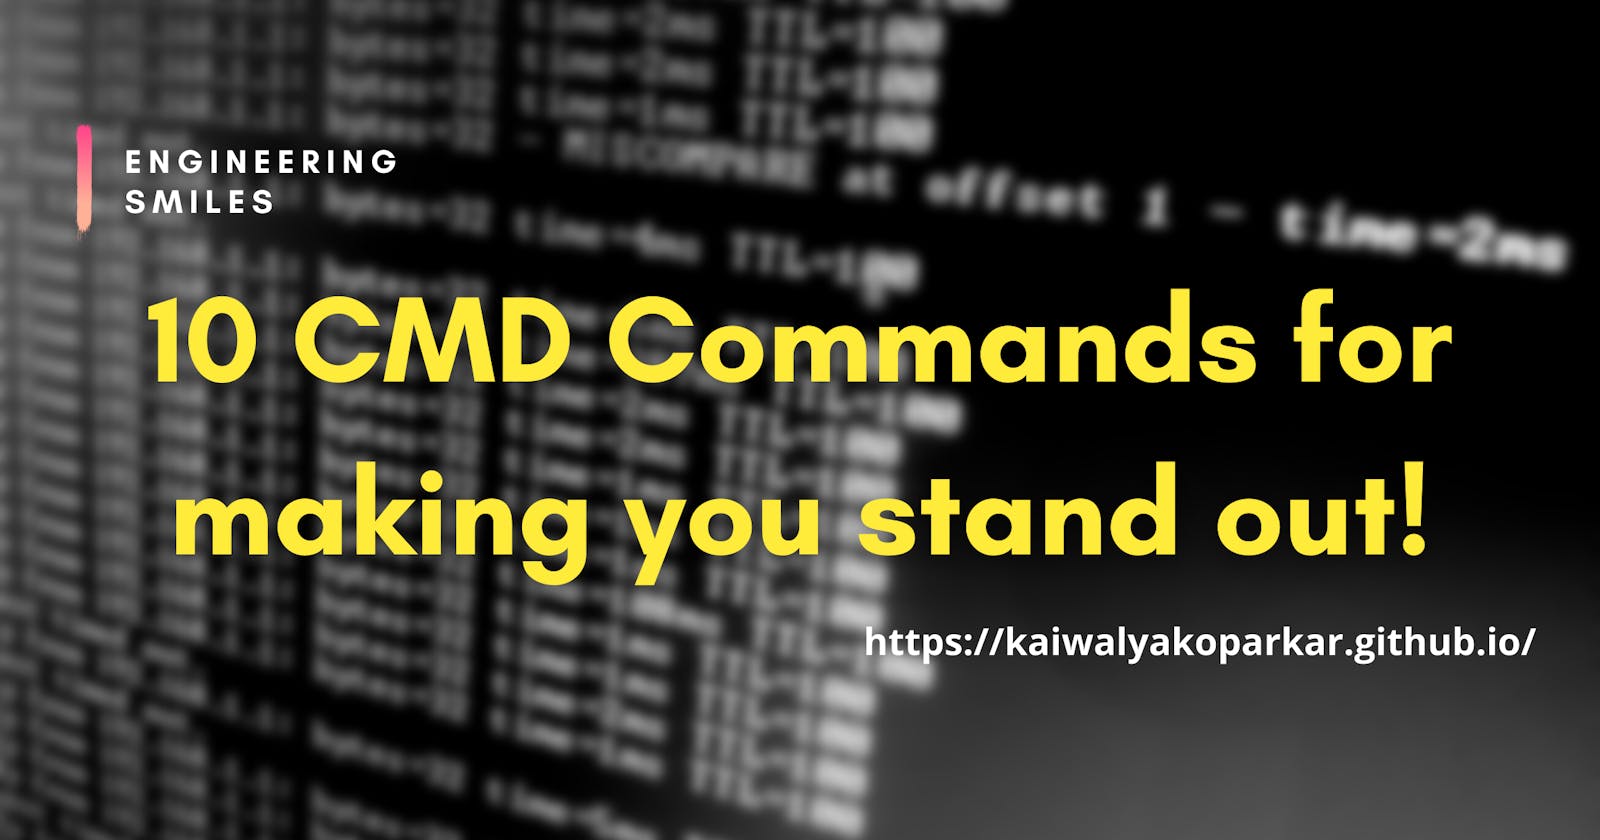 ✨10 CMD Commands to make you stand out!✨